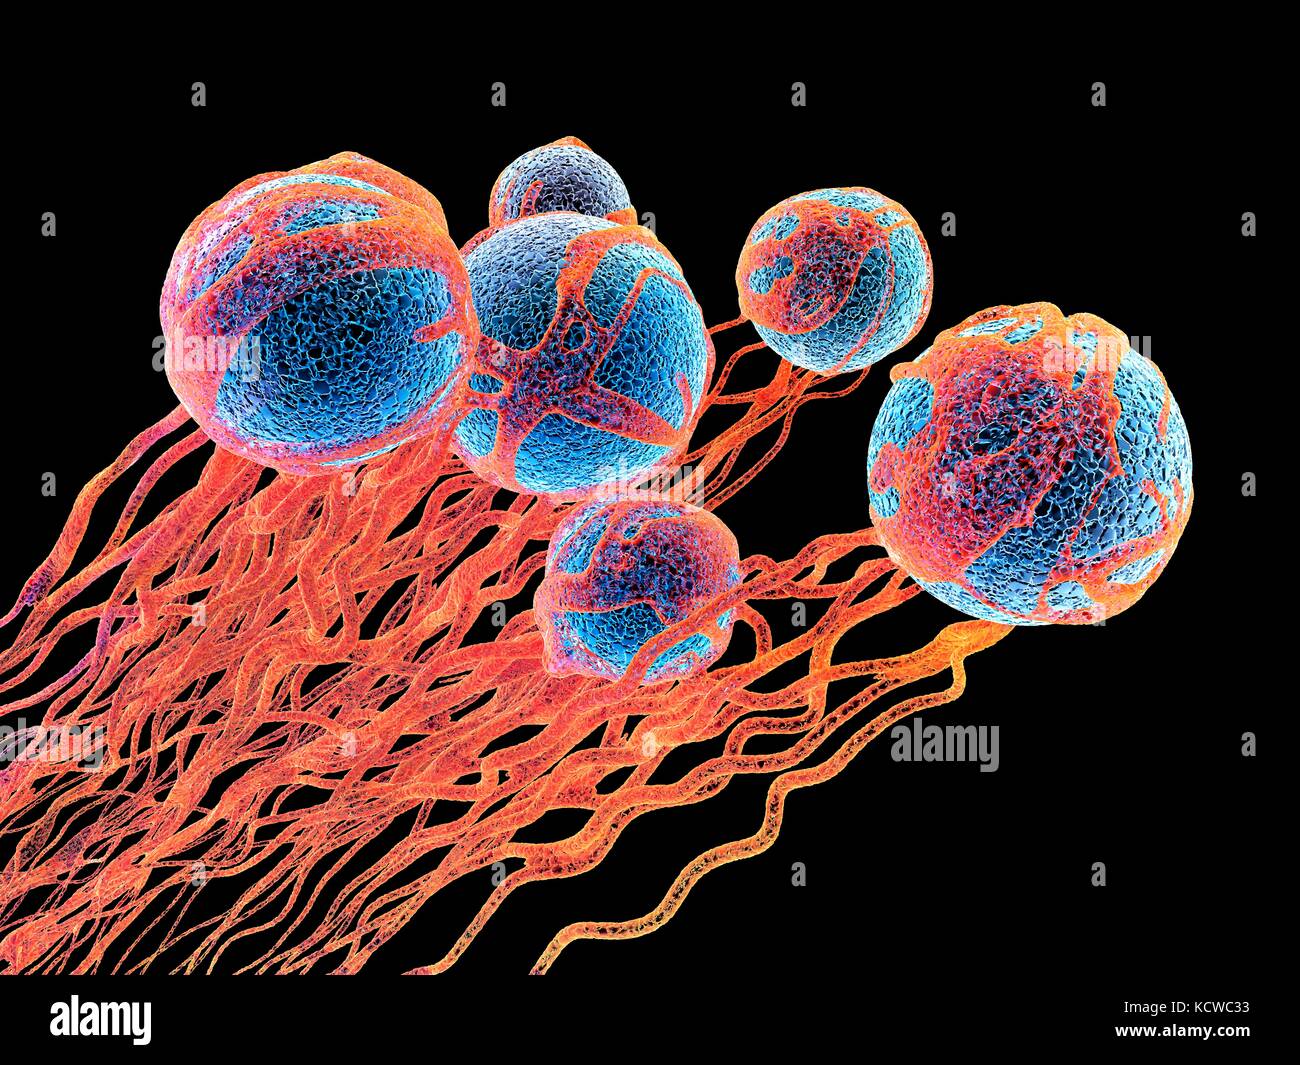 Cancer cells. Computer illustration of cancer cells, showing the blood vessel formation providing the the cells with oxygens and nutrigens. The cells with their nuclei are shown in blue. Stock Photo